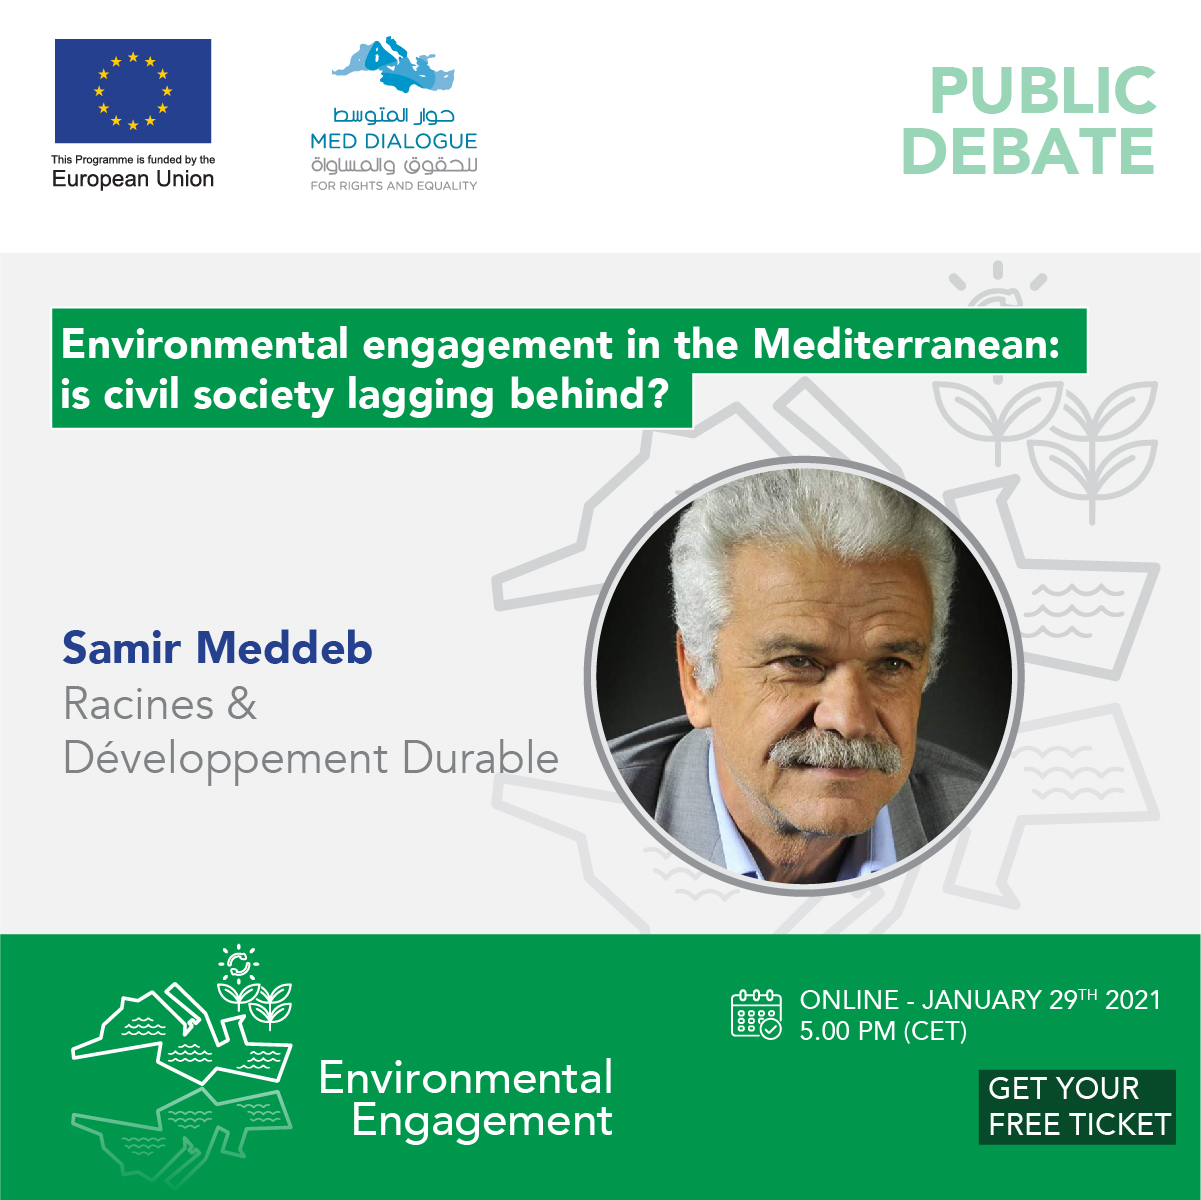 Med Dialogue Rights and Equality second public questions the environmental commitment of civil society - EU Neighbours